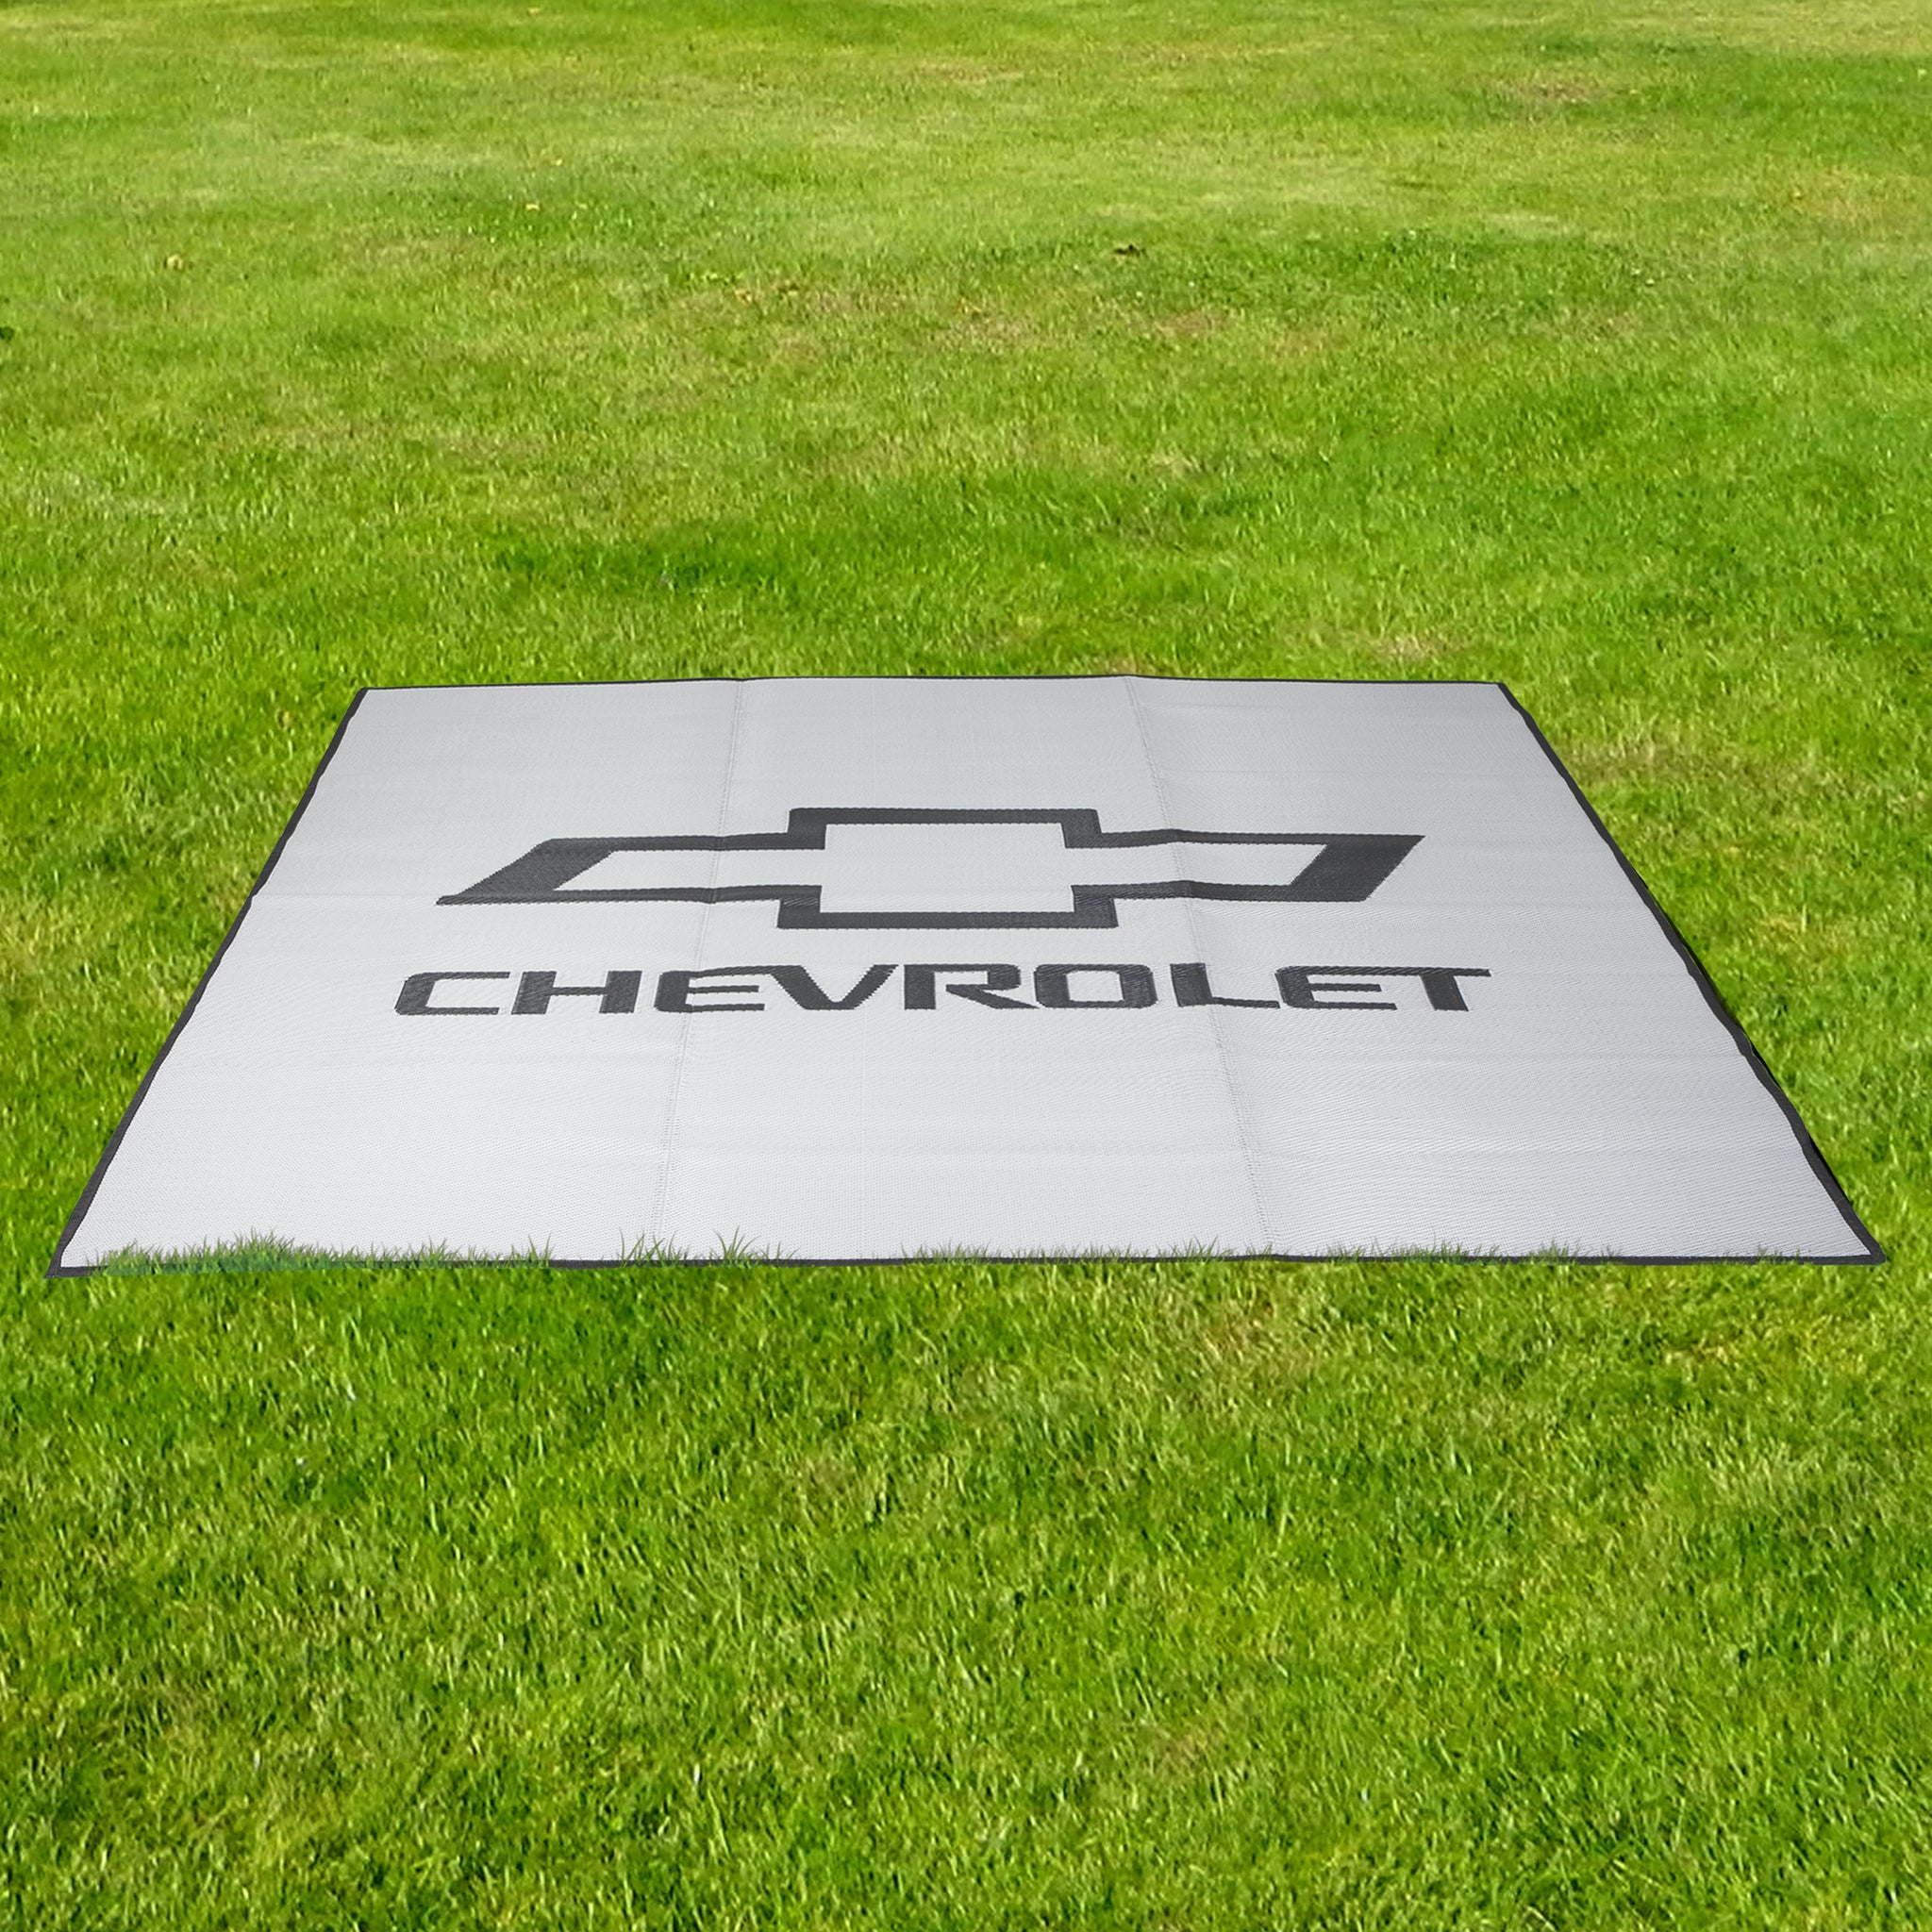 https://cdn.shopify.com/s/files/1/2393/7799/products/chevrolet-indooroutdoor-mat-with-carrying-case-smart-design-auto-7000924at-incrementing-number-330277.jpg?v=1679344727